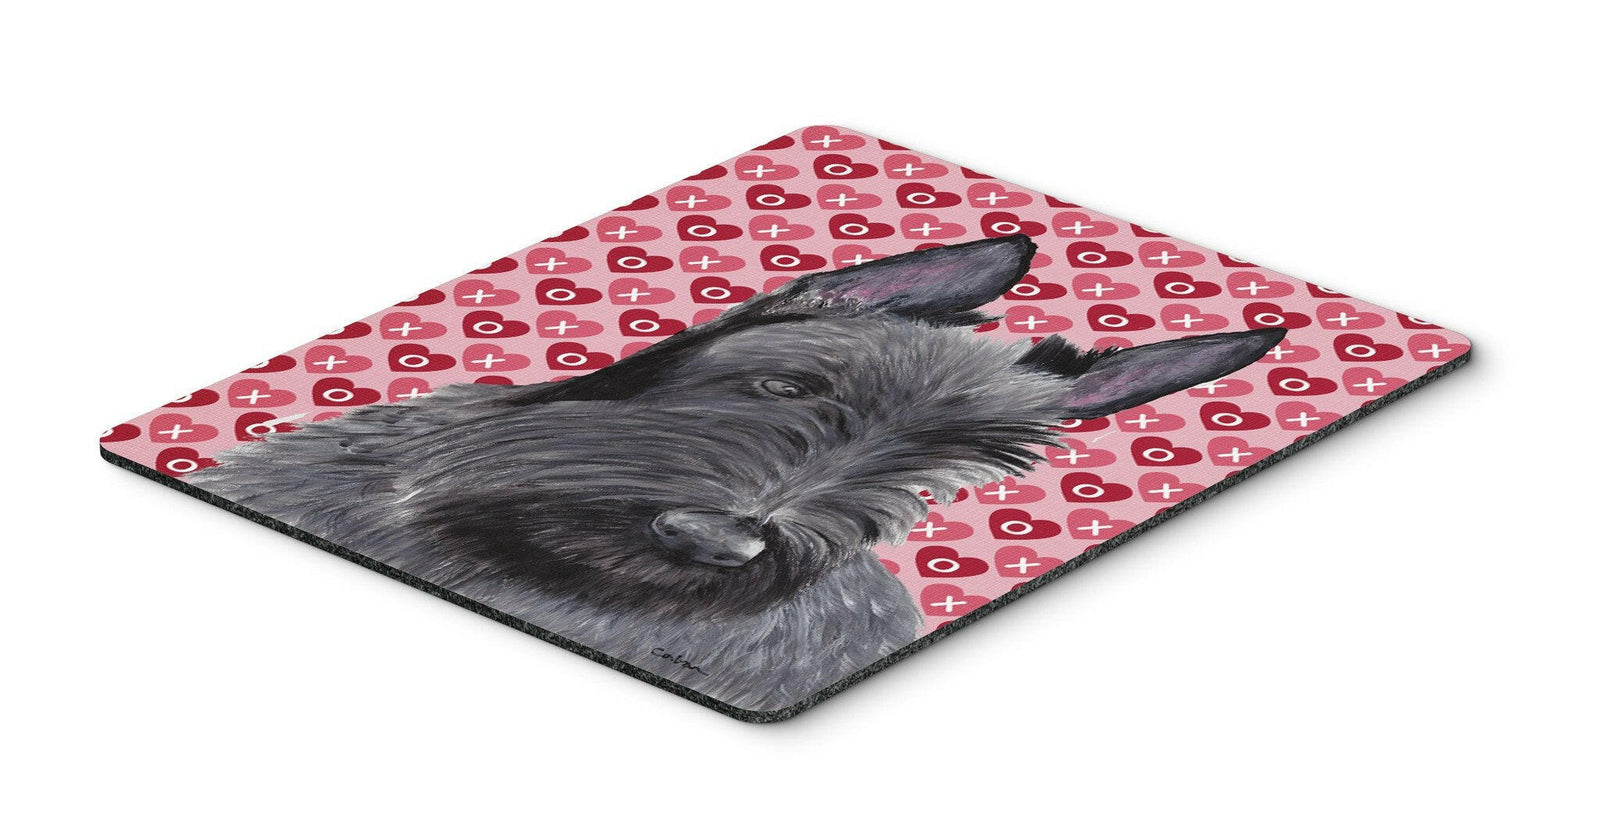 Scottish Terrier Hearts Love and Valentine's Day Mouse Pad, Hot Pad or Trivet by Caroline's Treasures